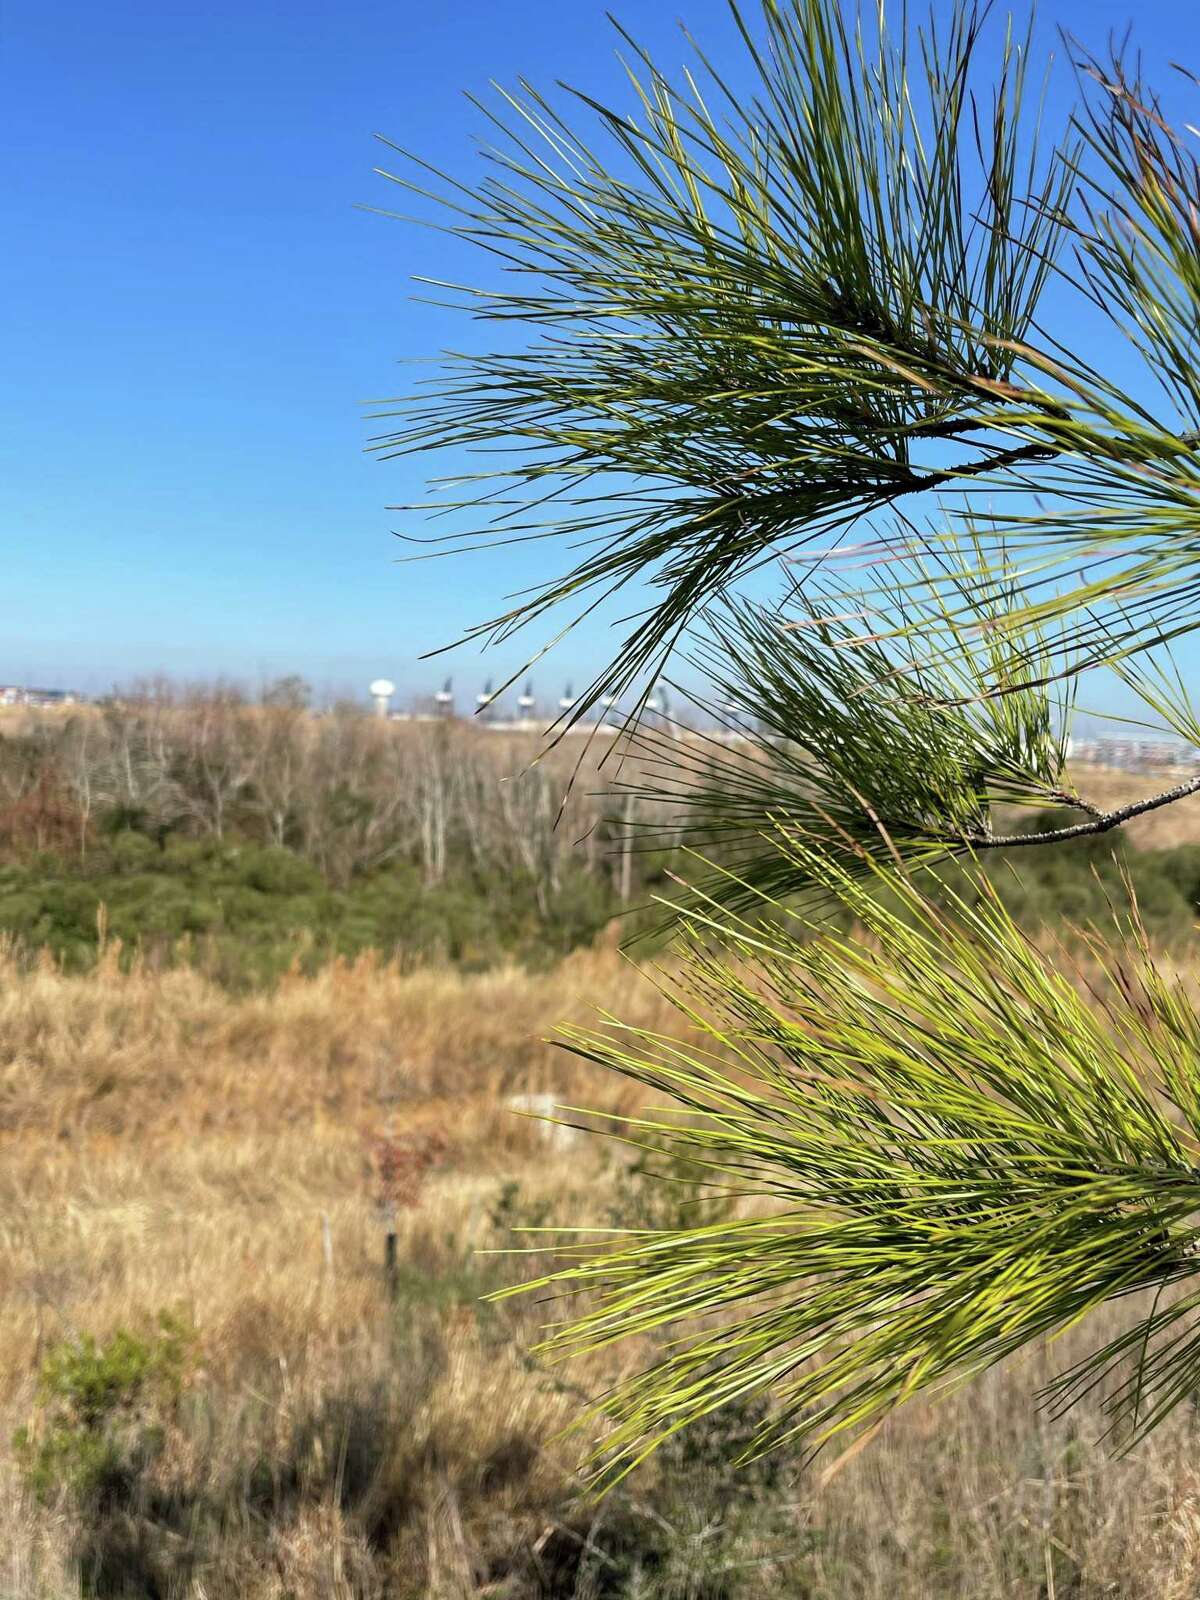 A view through a young loblolly pine, one of the designated ‘super trees’ planted by Houston Wilderness and its partners along the three-mile long, 30-foot high Bayport Berm, looking toward Port Houston’s Bayport Container Terminal, on Wednesday, Jan. 13, 2021.